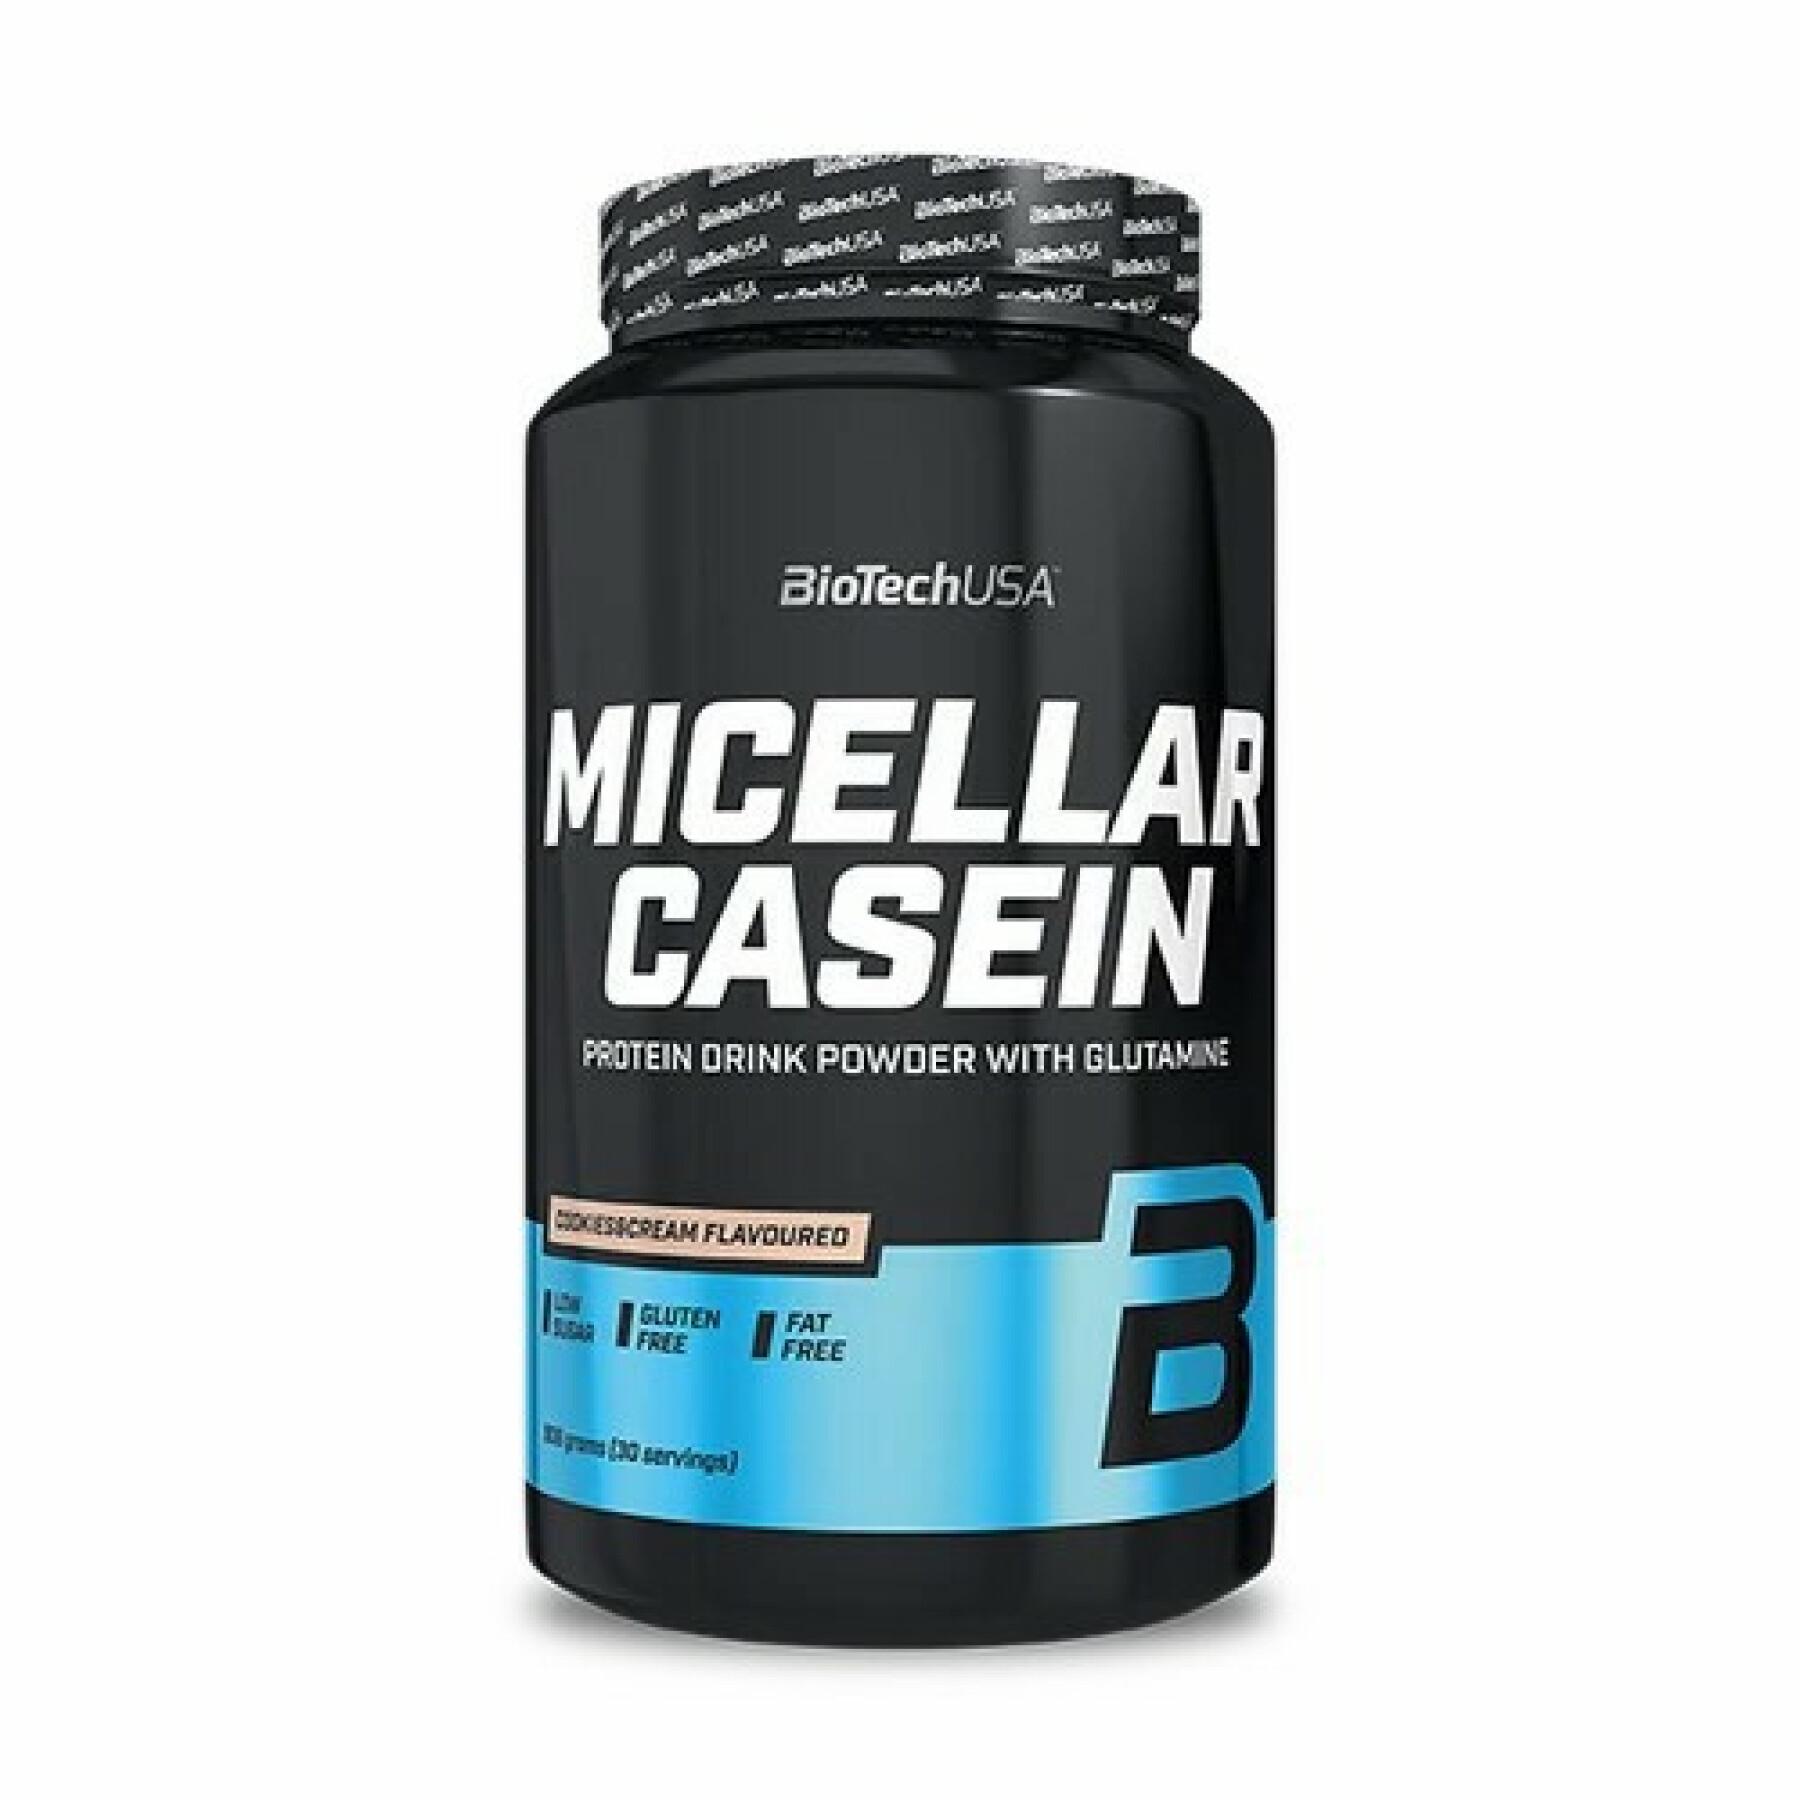 Pack of 6 jars of micellar casein proteins Biotech USA-Cookies & cream 908g